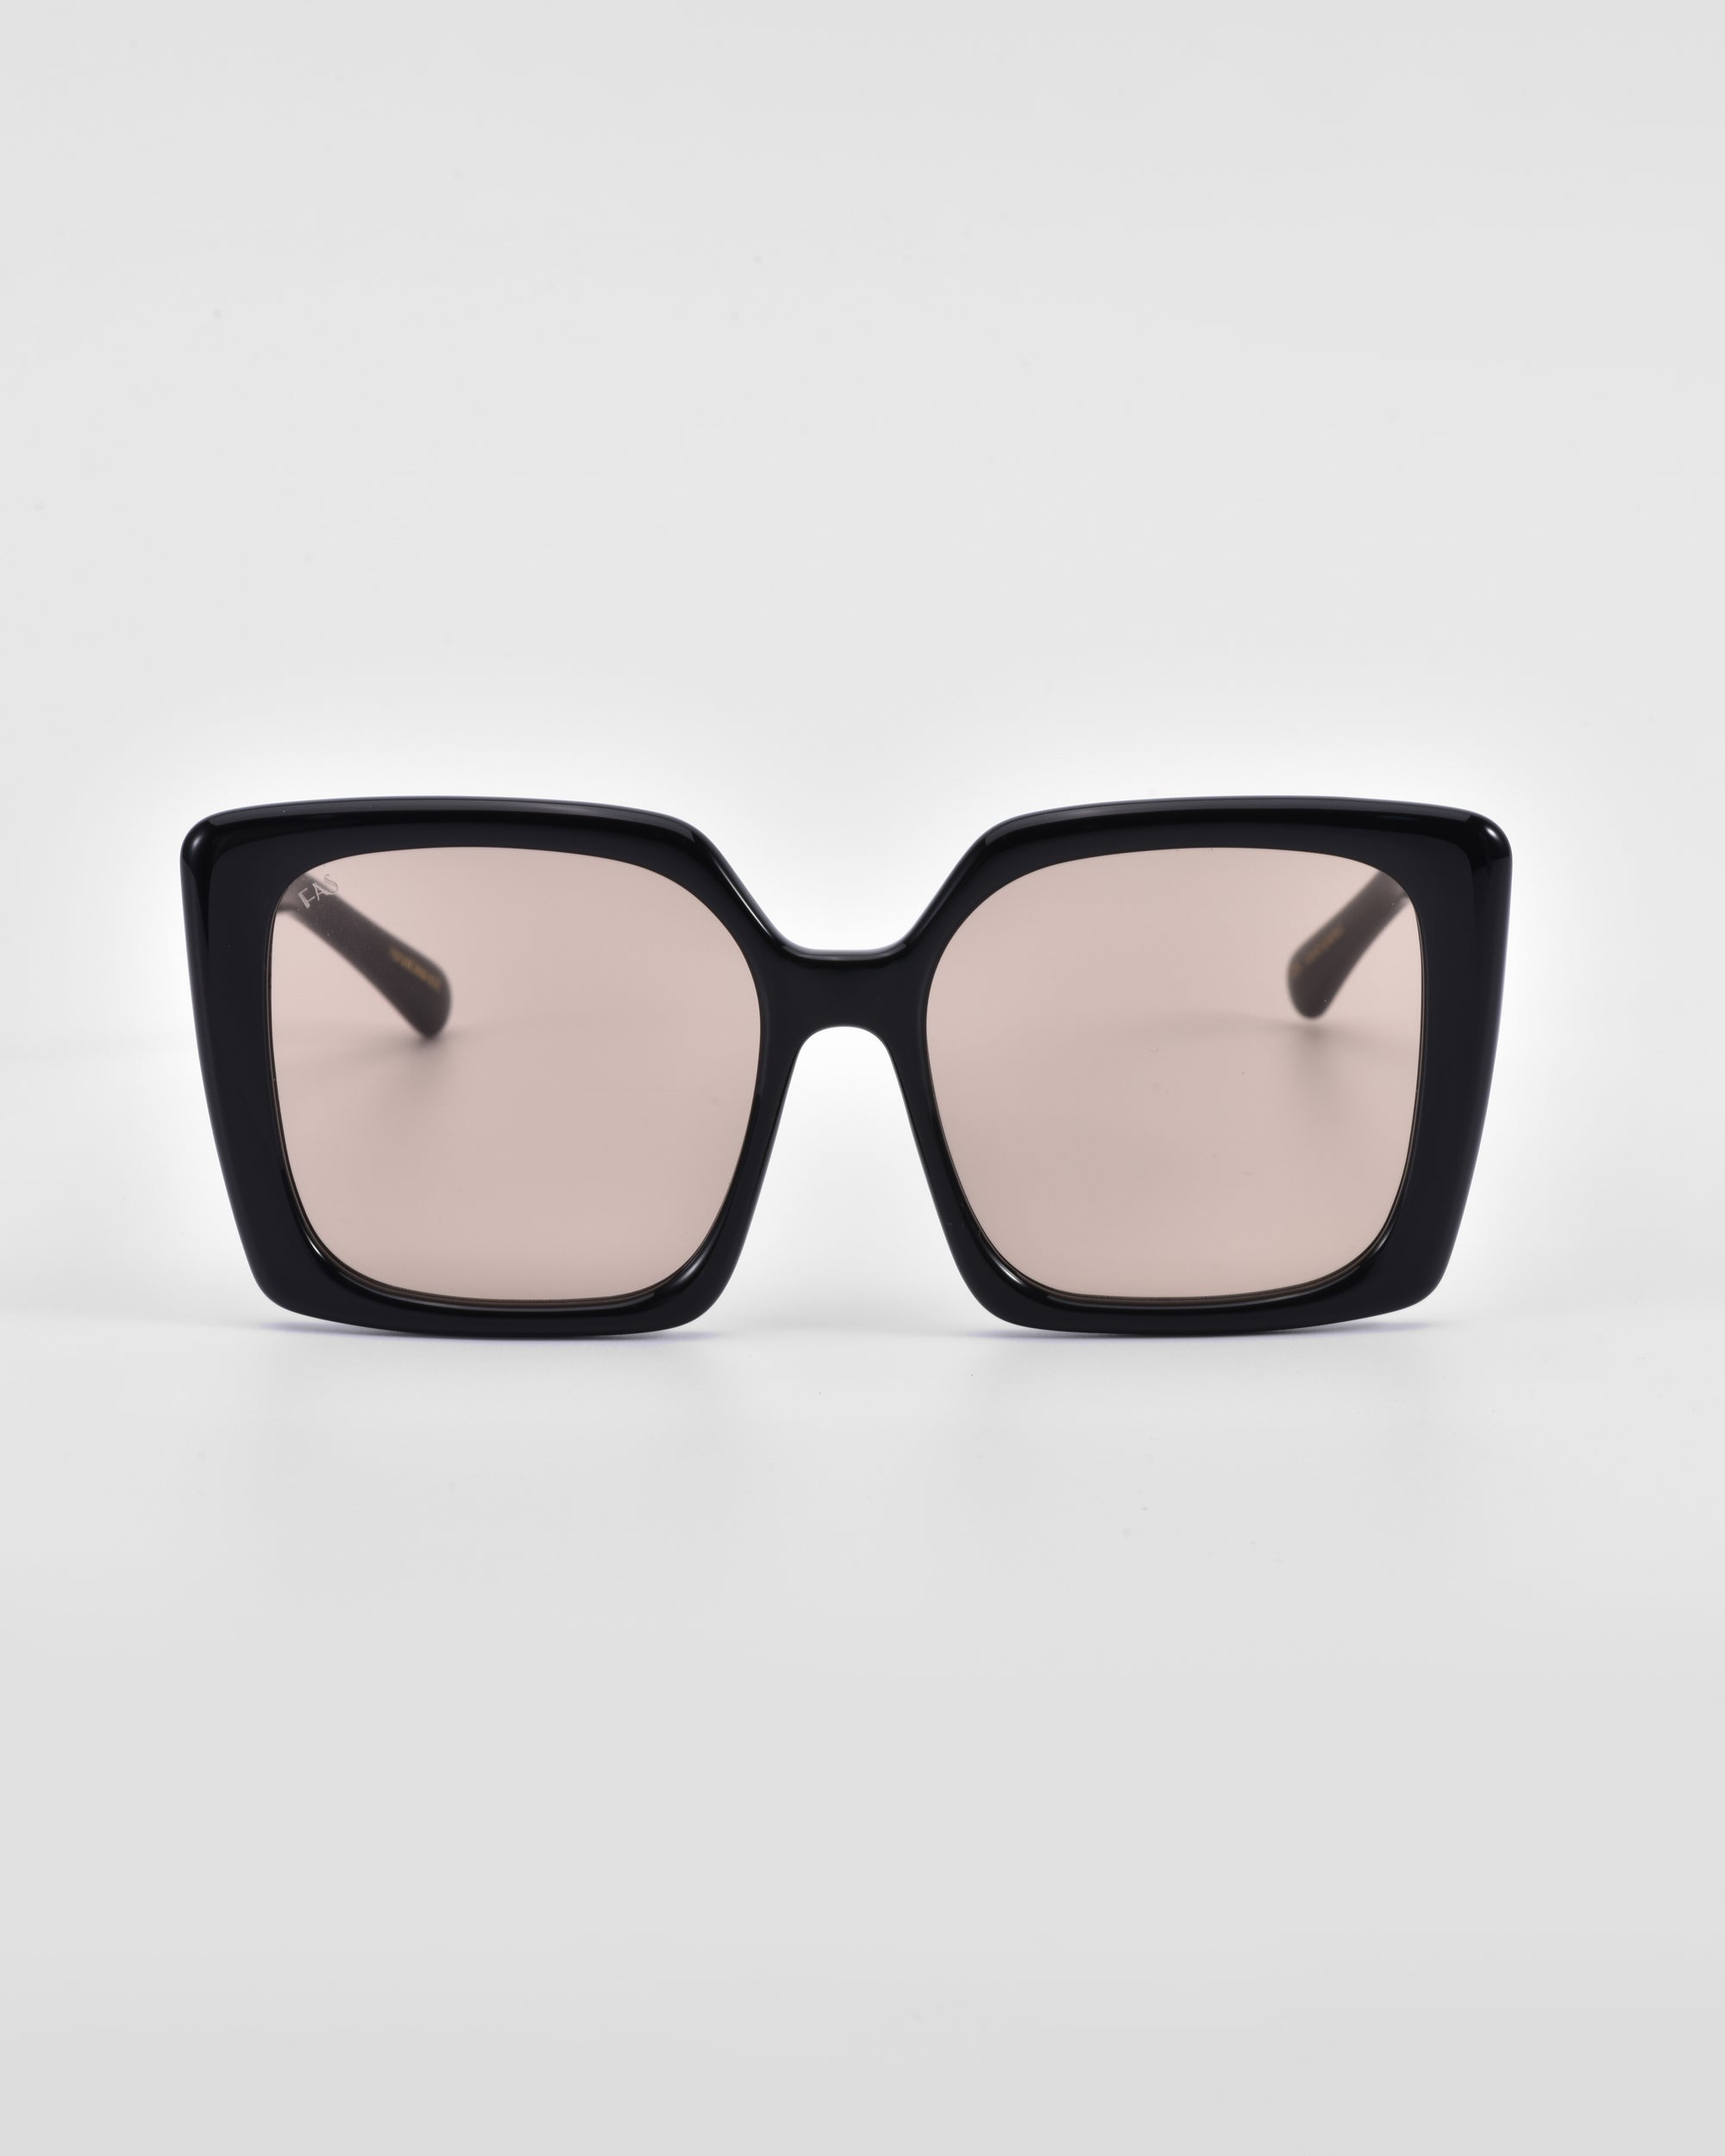 Front view of Eos oversized soft-square sunglasses by For Art's Sake® with black rims and pink-tinted lenses against a white background.